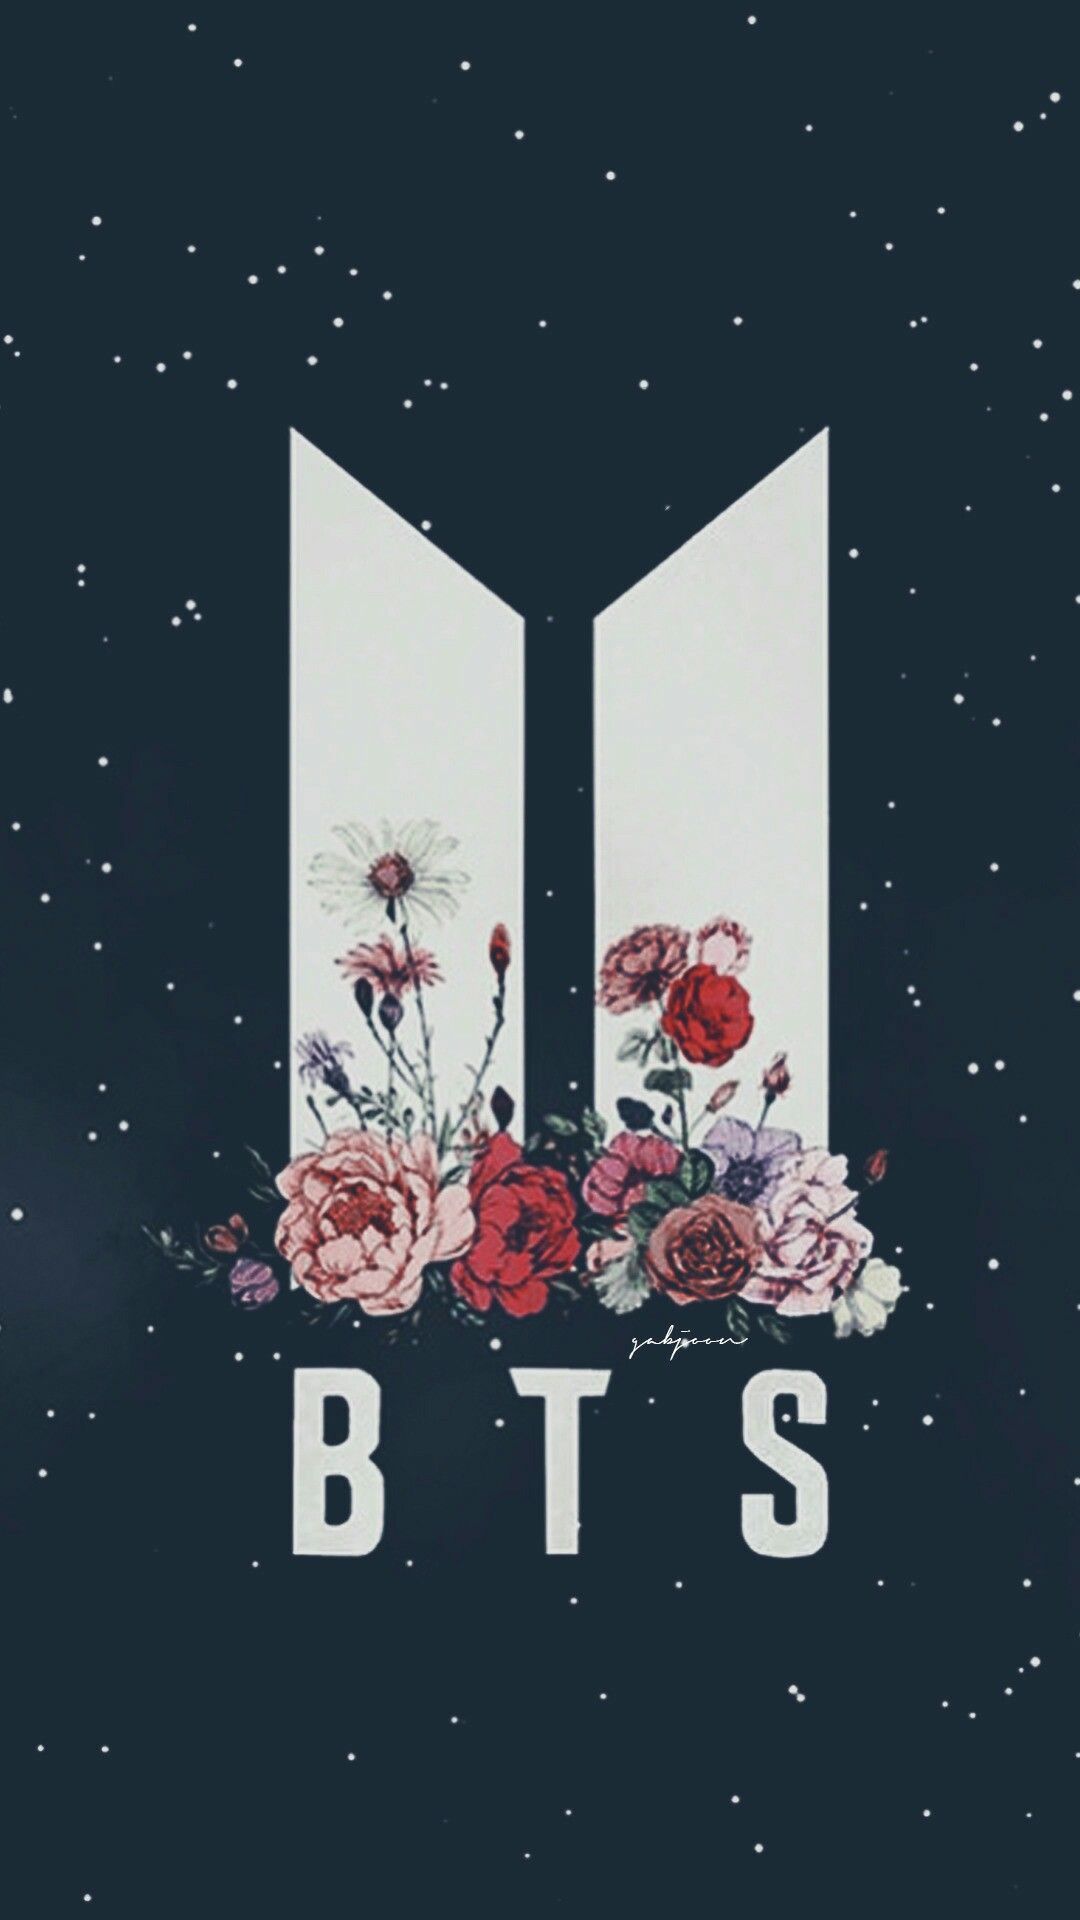 Logo bts army png